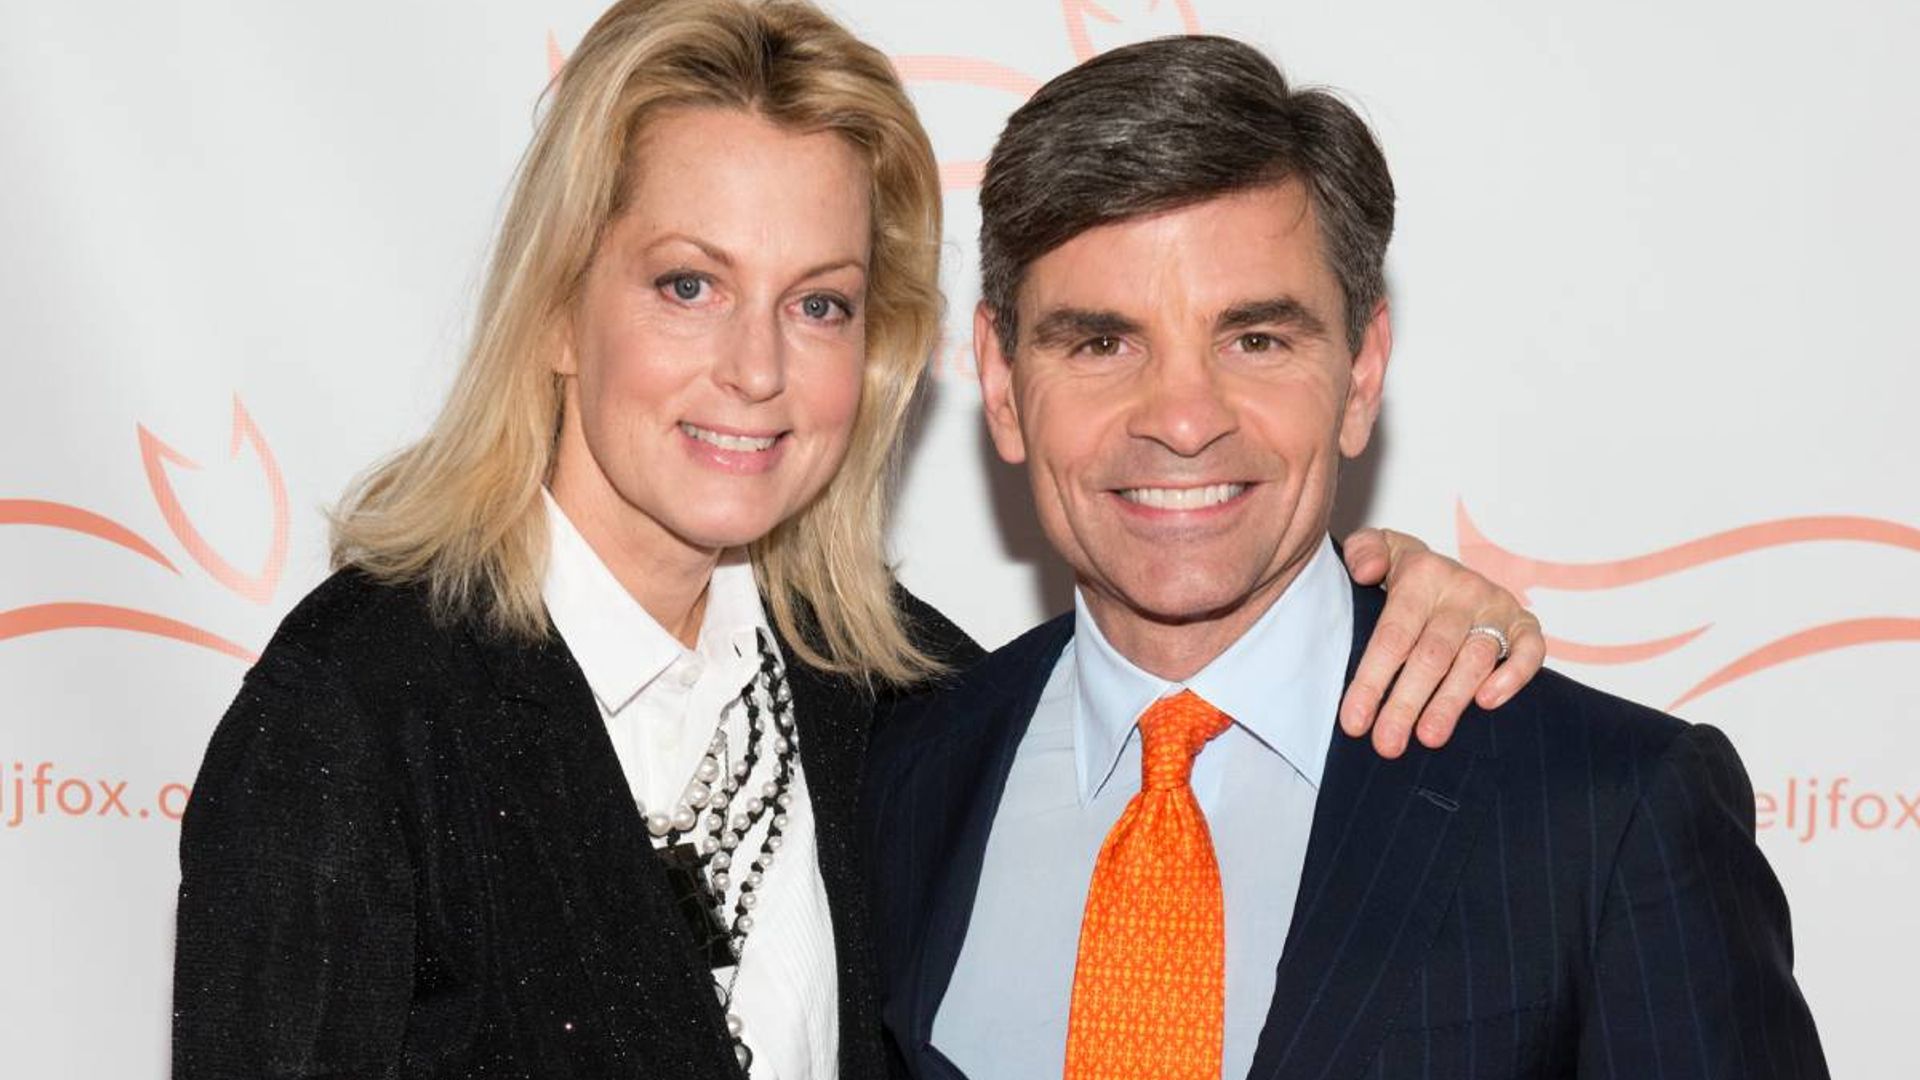 George Stephanopoulos and Ali Wentworth both faced same health battle.